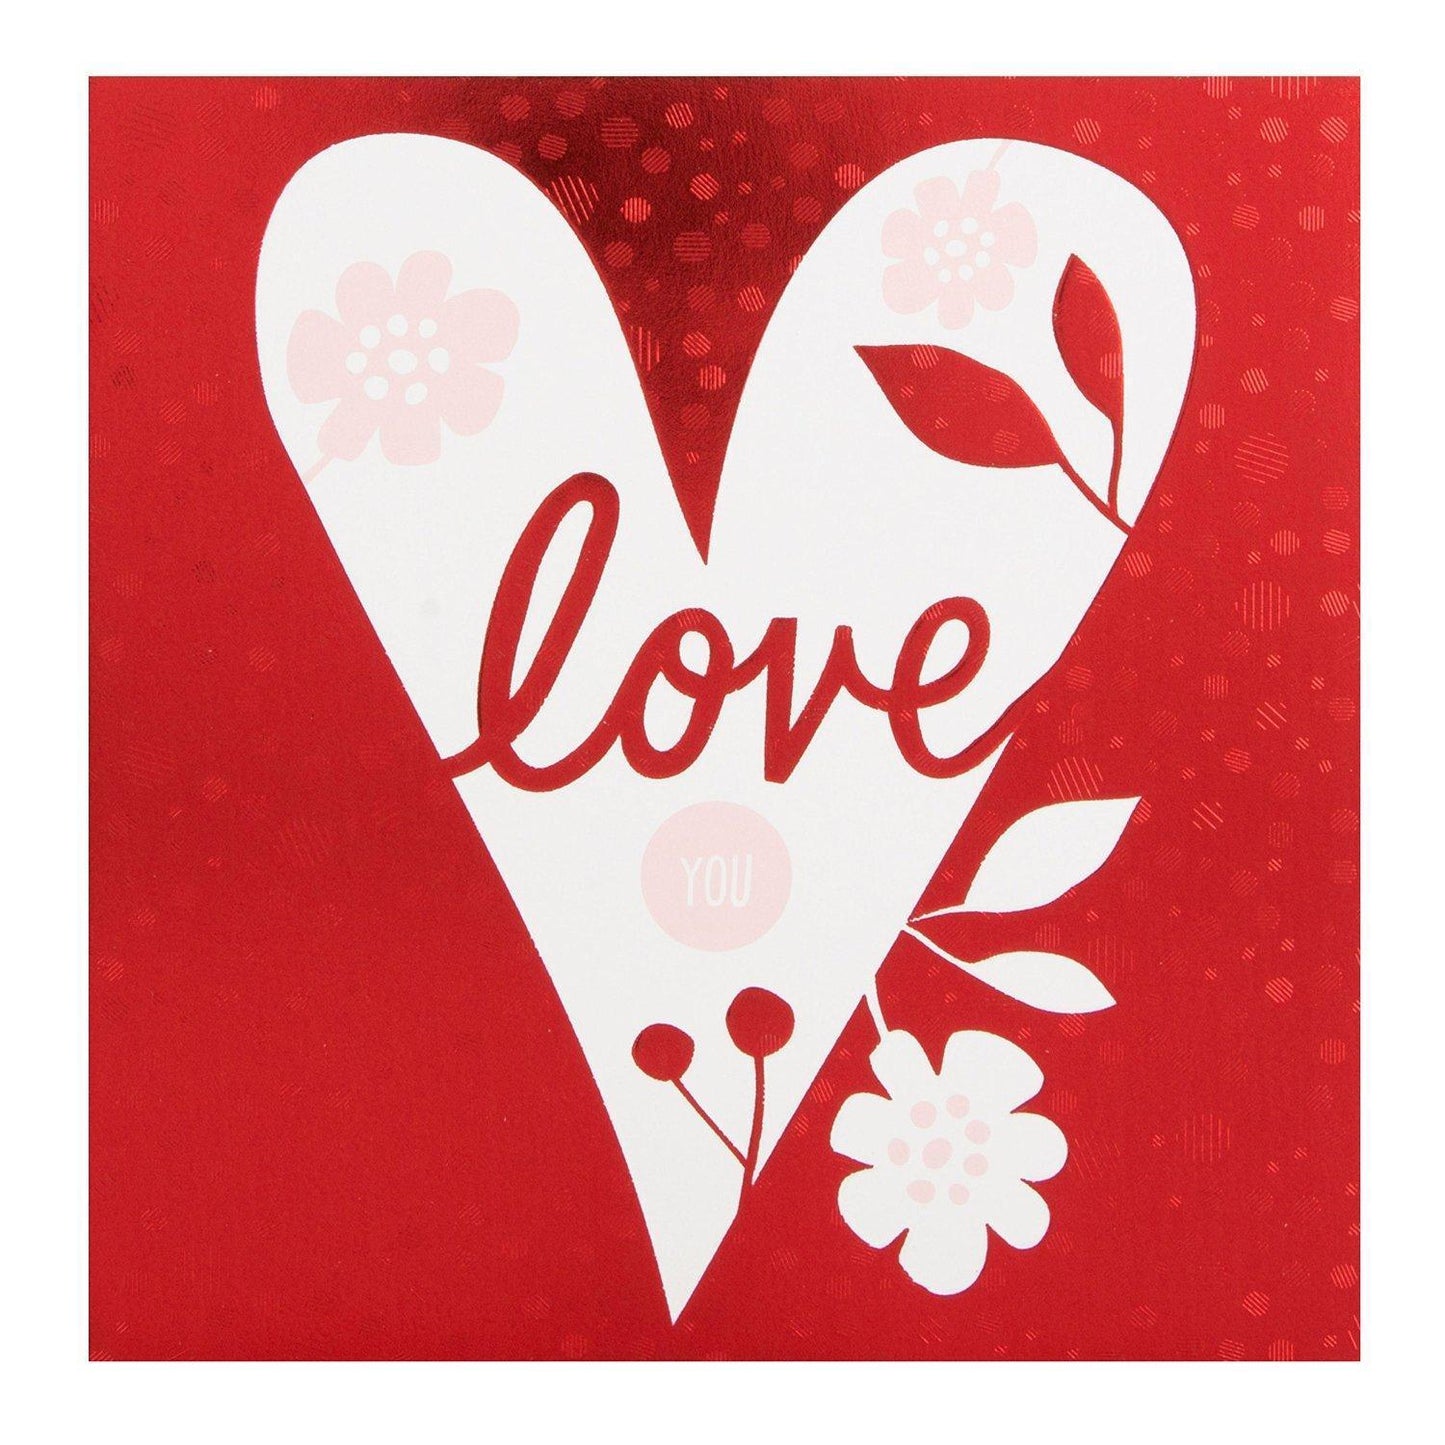 'Love You' Heart Design Beautiful Red Valentine's Day Square Card